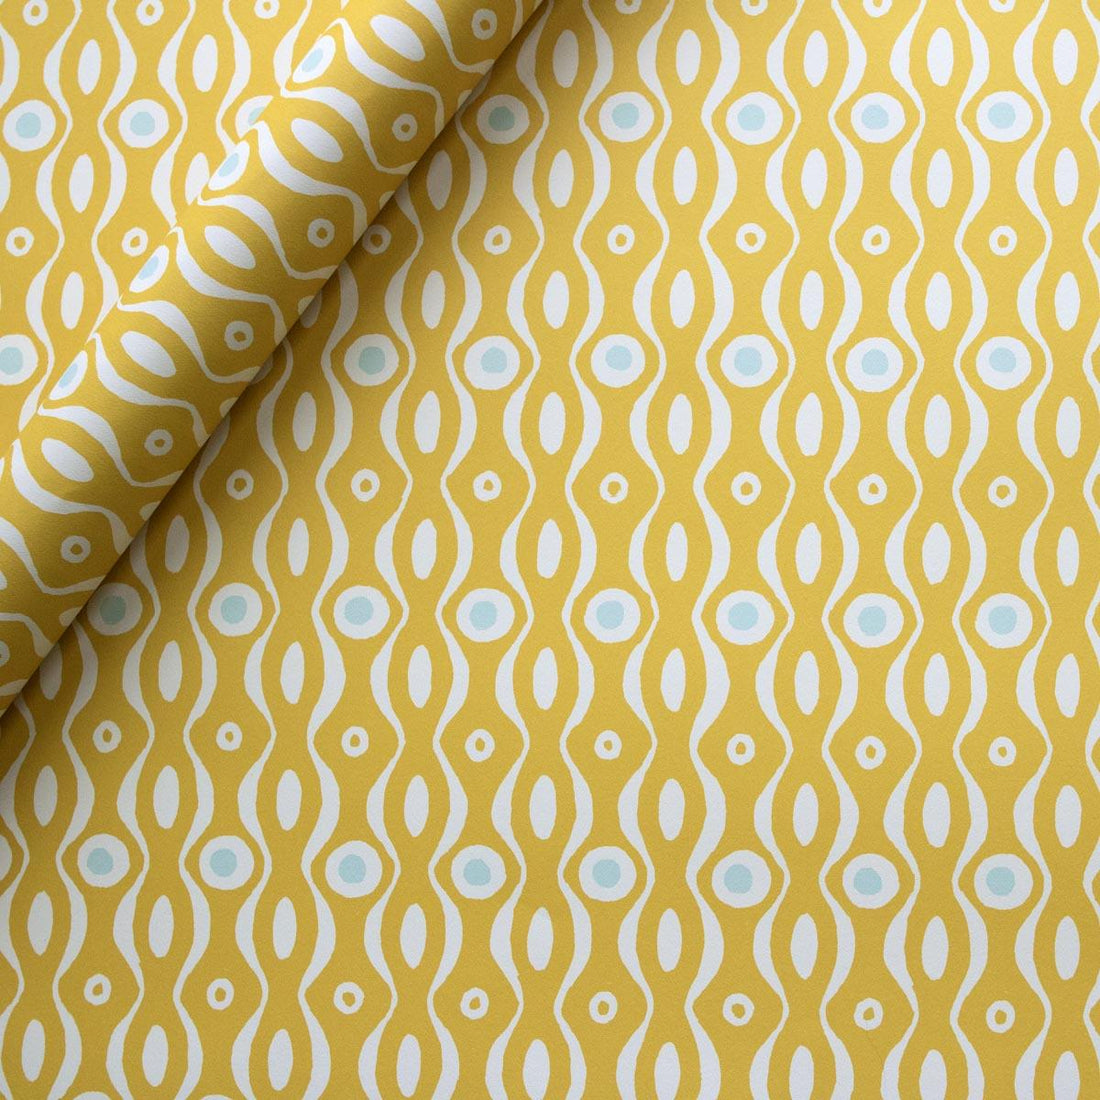 CAMBRIDGE IMPRINT SMALL WRAPPING PAPER | YELLOWS